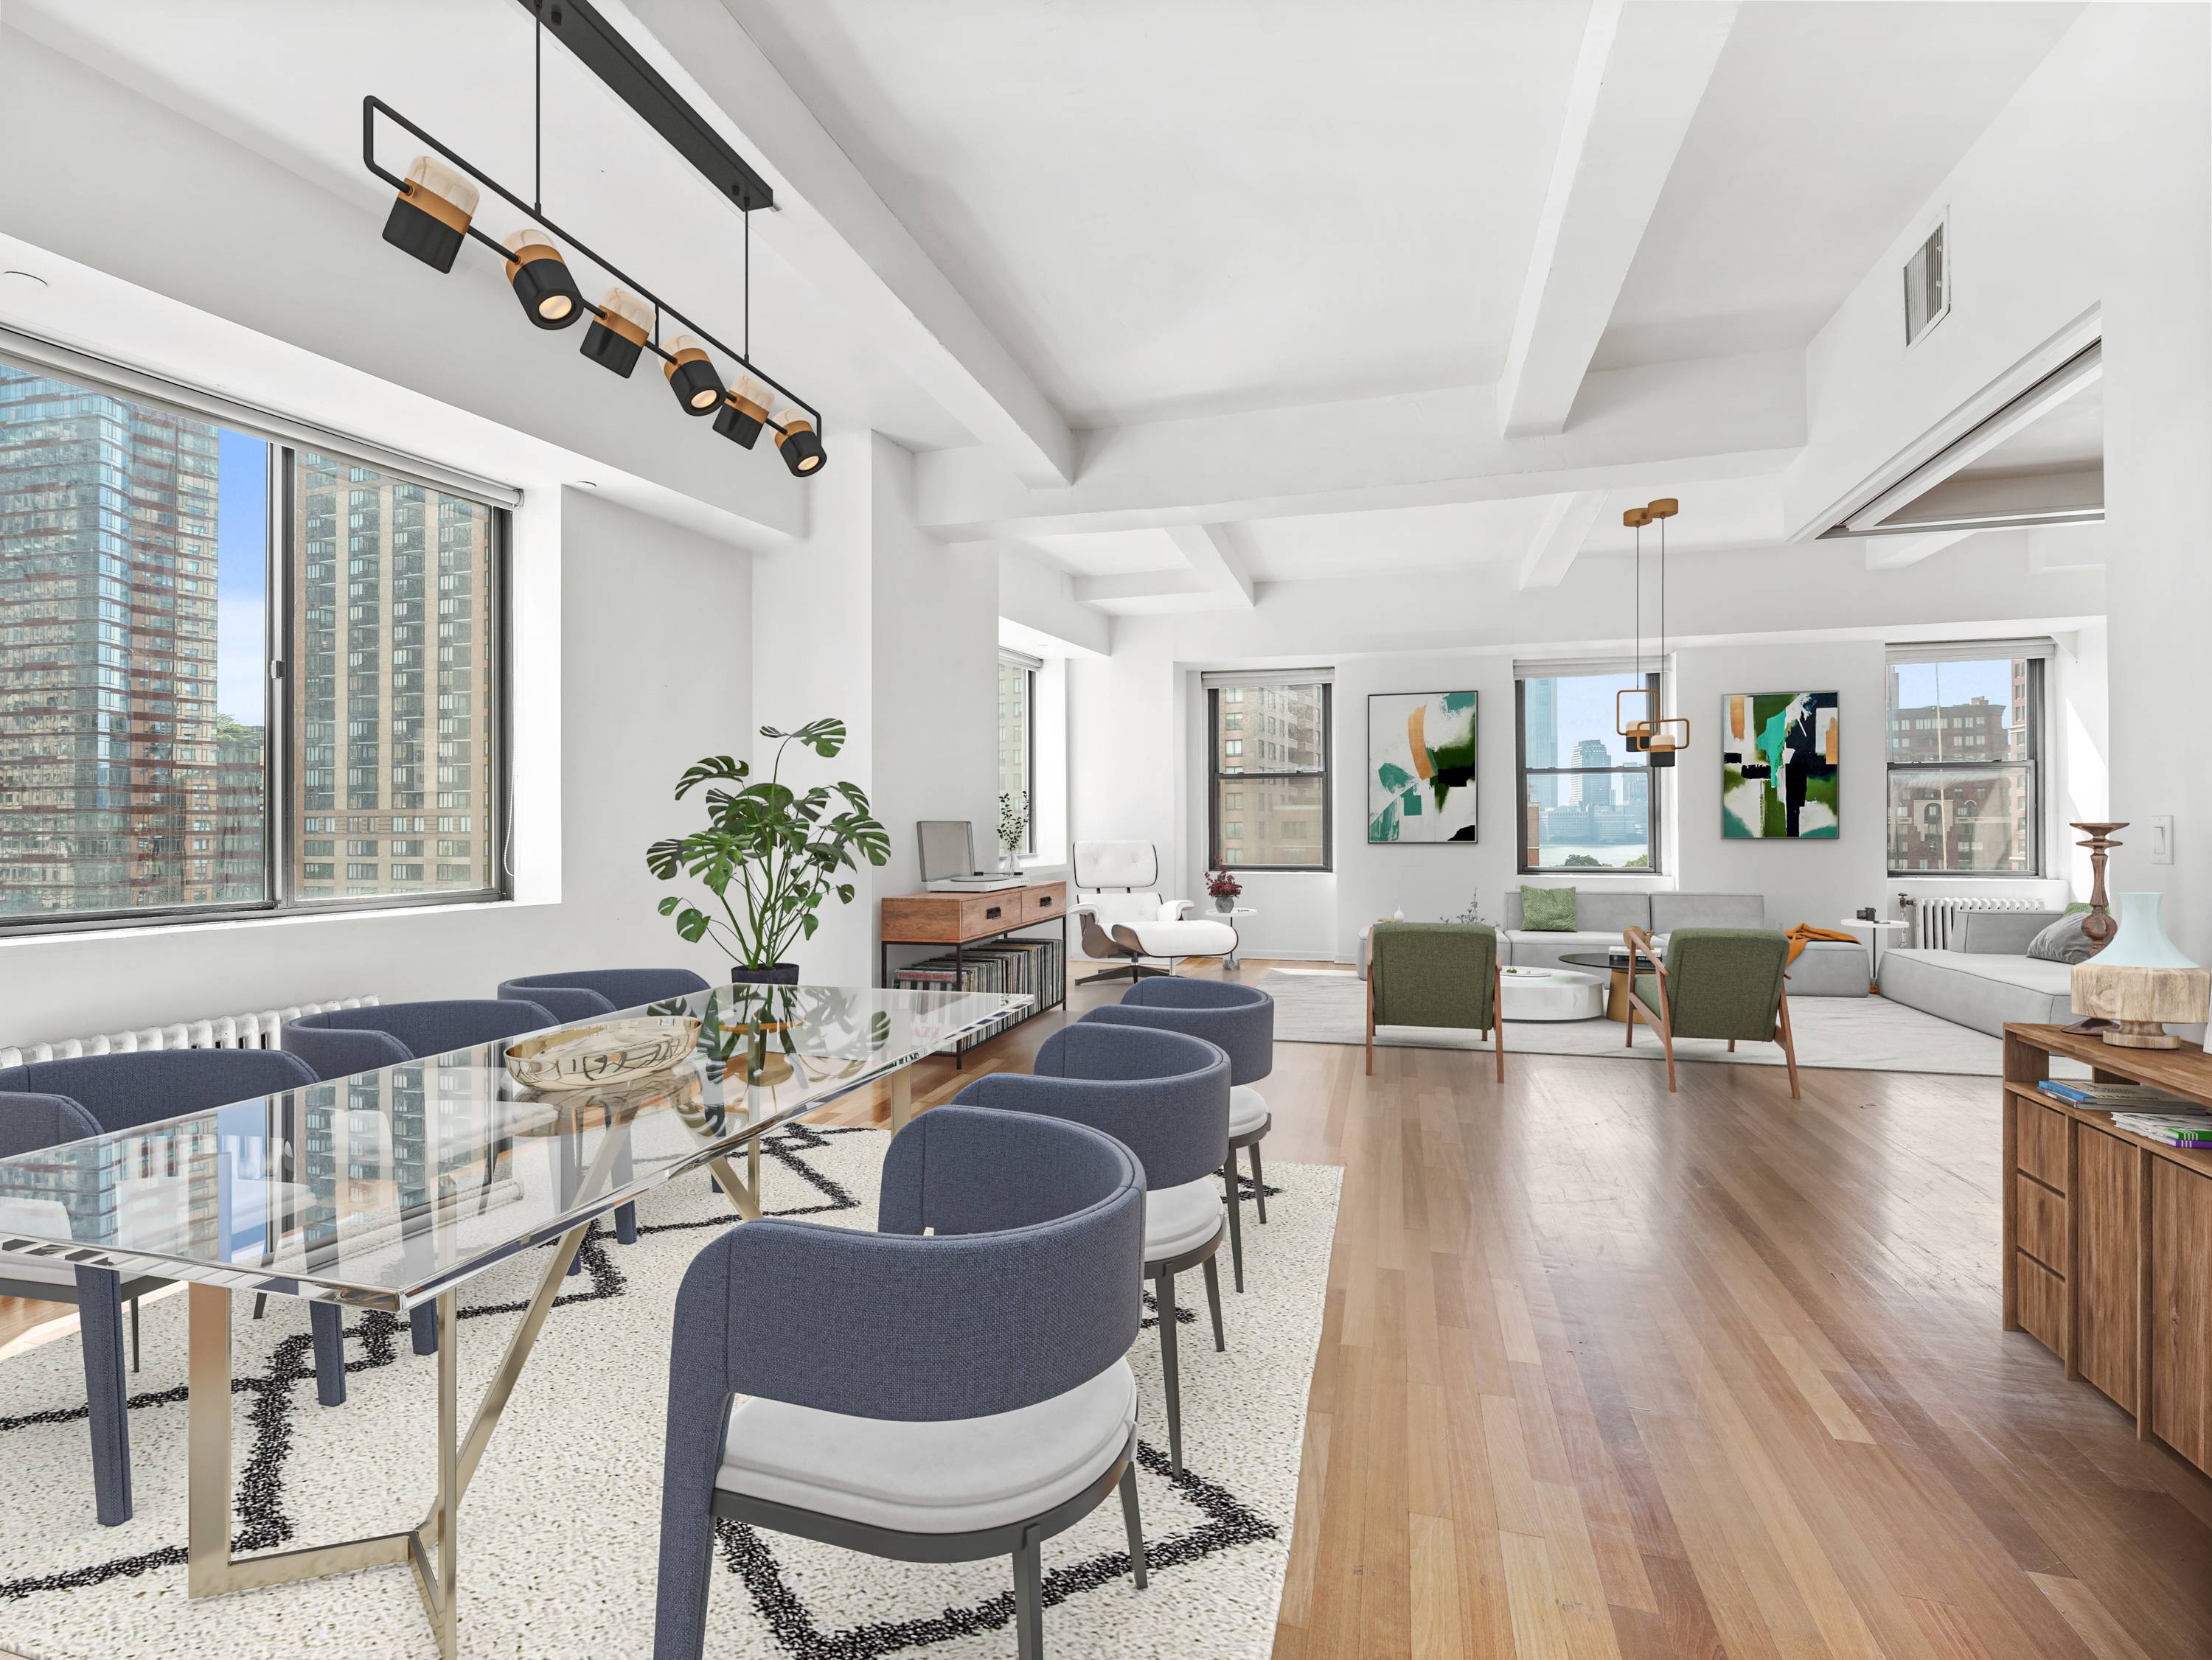 Surround yourself in outstanding sunlight and water views in this exceptional convertible three bedroom, three bathroom full floor loft in the perfect West FiDi location.